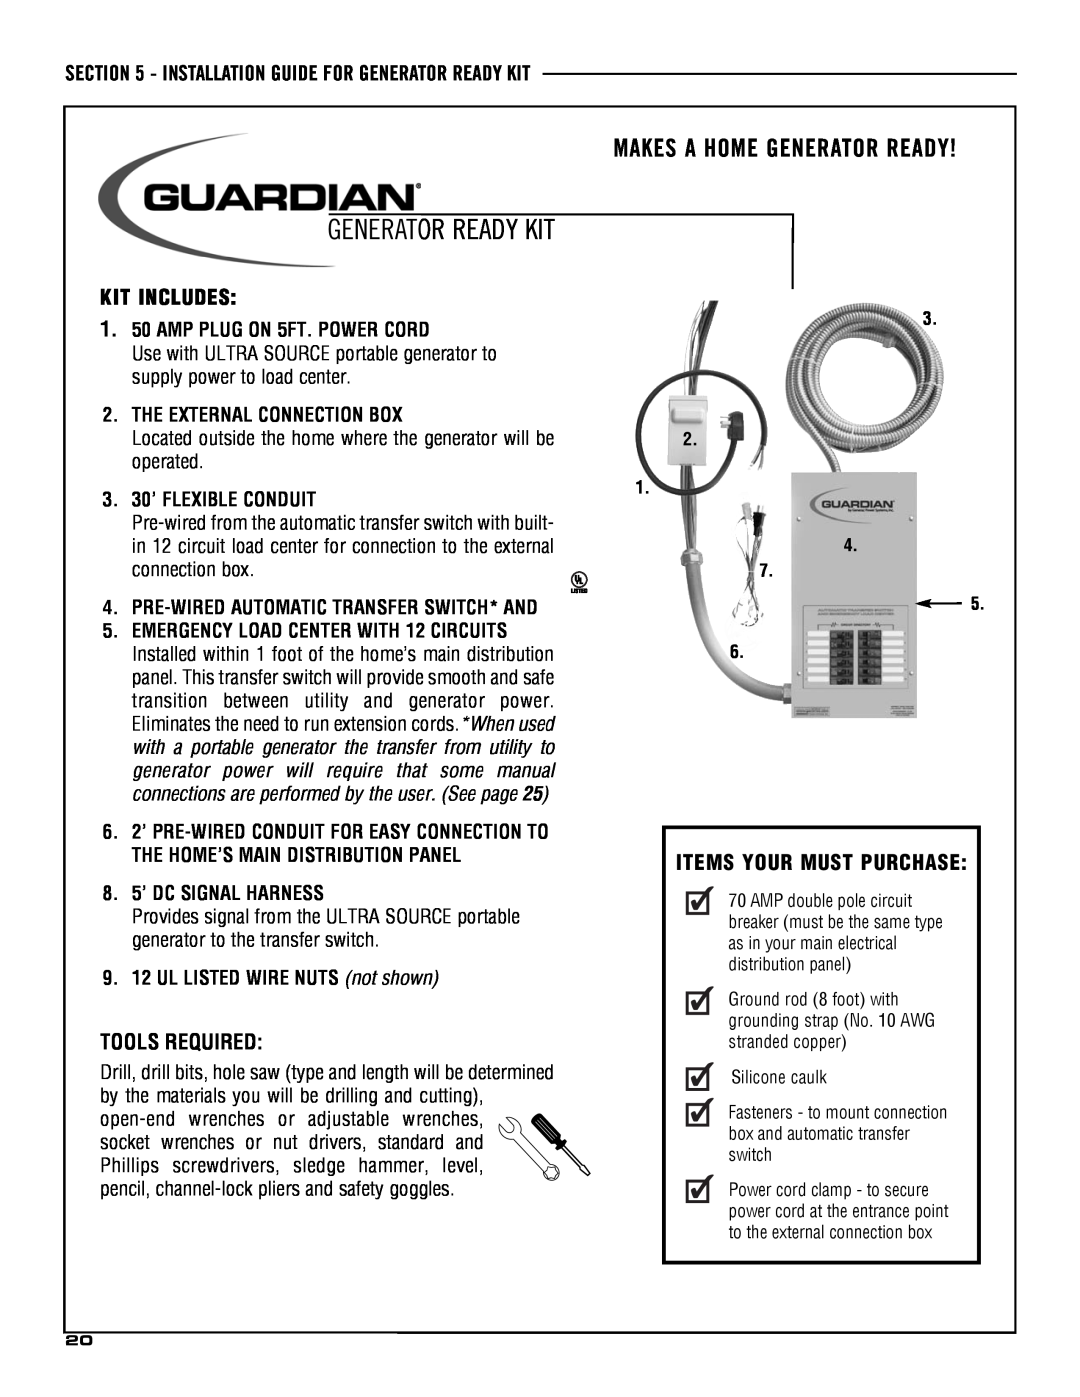 Guardian Technologies 5209 Makes A Home Generator Ready, Installation Guide For Generator Ready Kit, Kit Includes 